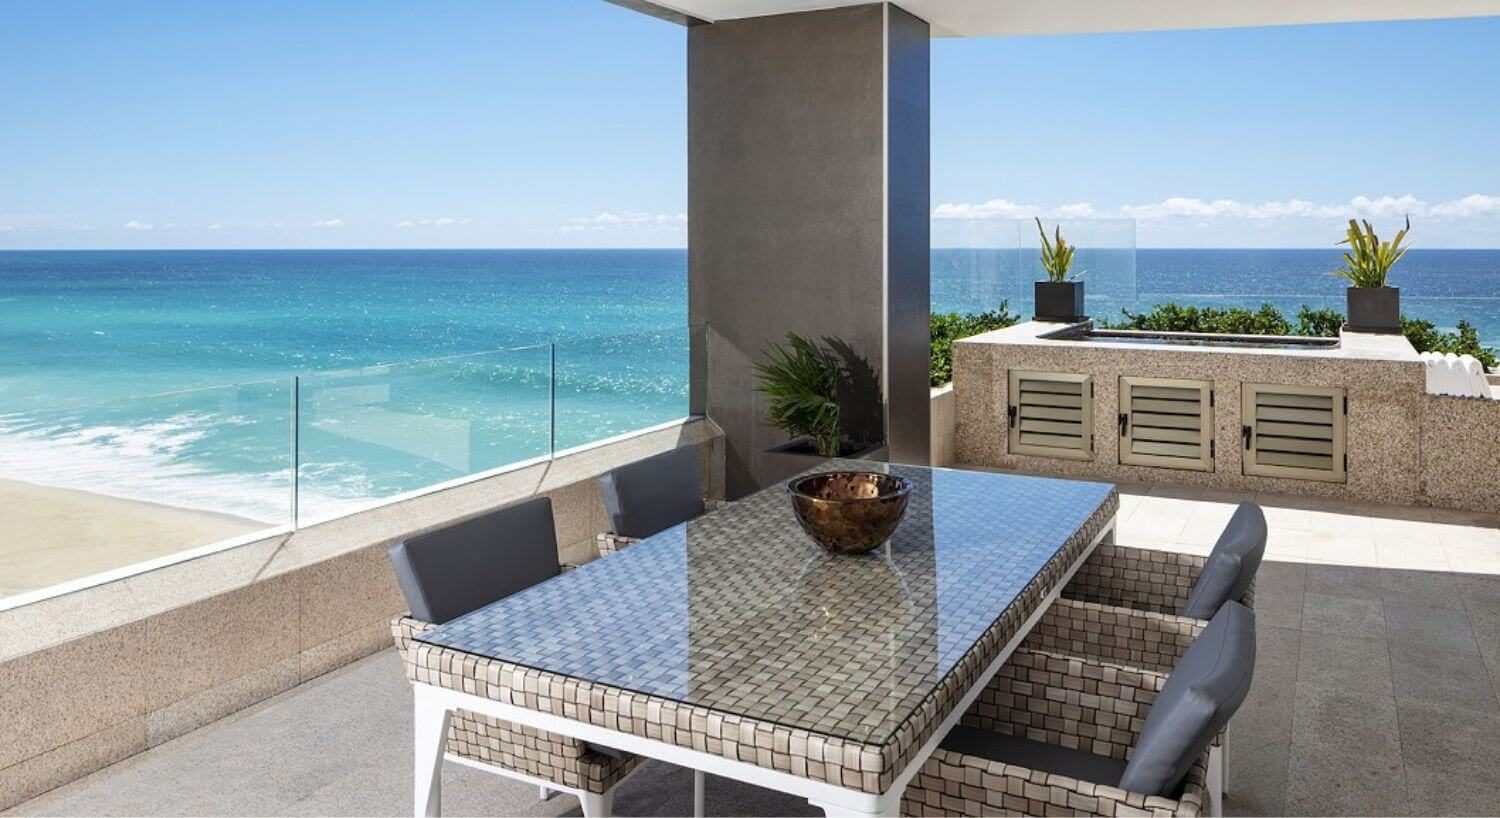 A balcony with a dining table and chairs, a jacuzzi, and views of the sandy beach and turquoise and blue ocean.